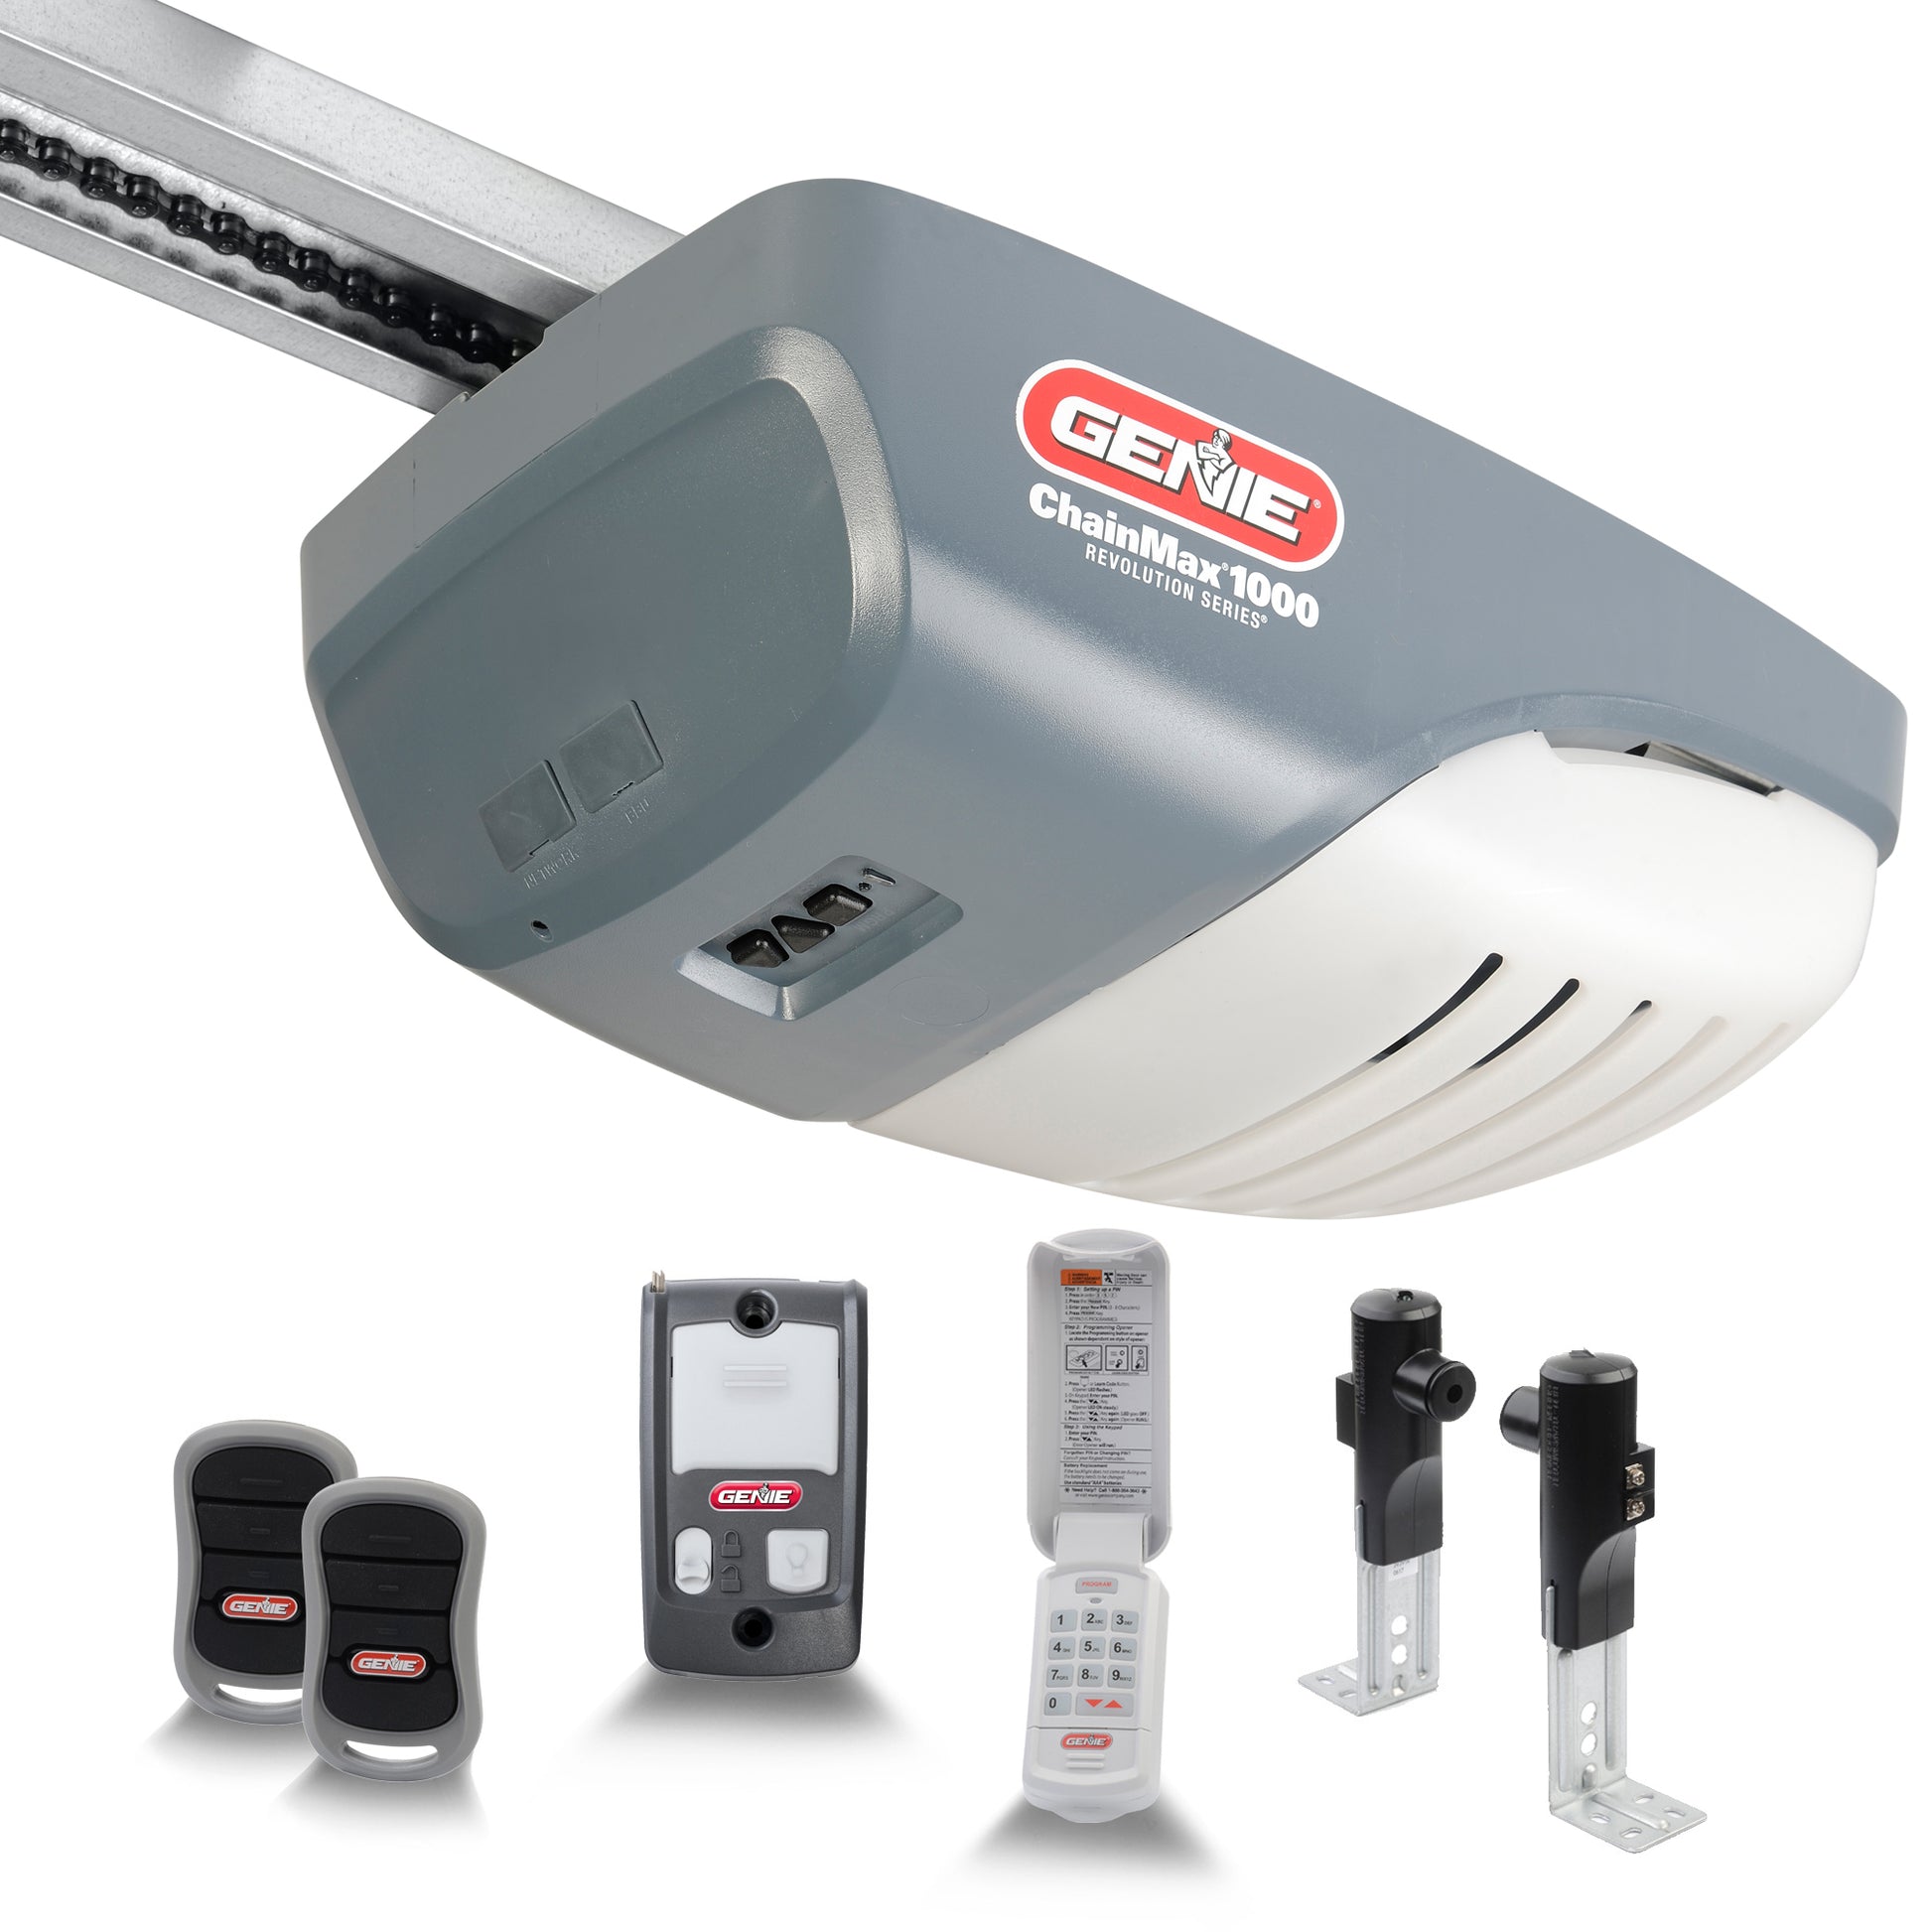 3022-TKH Genie chain drive garage door opener comes with 2 remotes and a wireless keypad